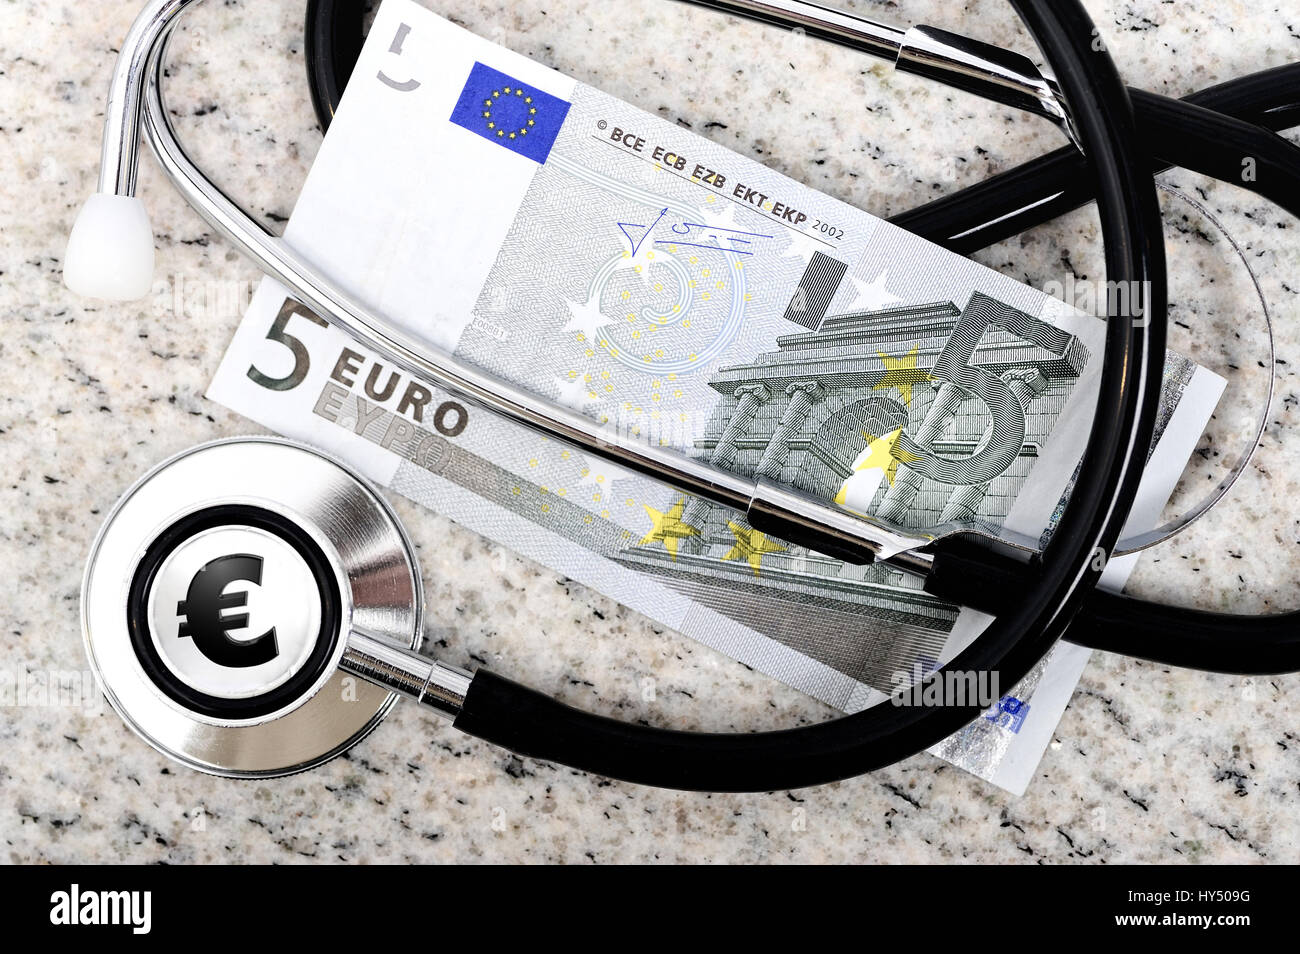 Arzt-Stethoskop and Fuenf-euro-light, payment of five euros per doctor's visit, Arzt-Stethoskop und Fuenf-Euro-Schein, Bezahlung von fuenf Euro pro Ar Stock Photo